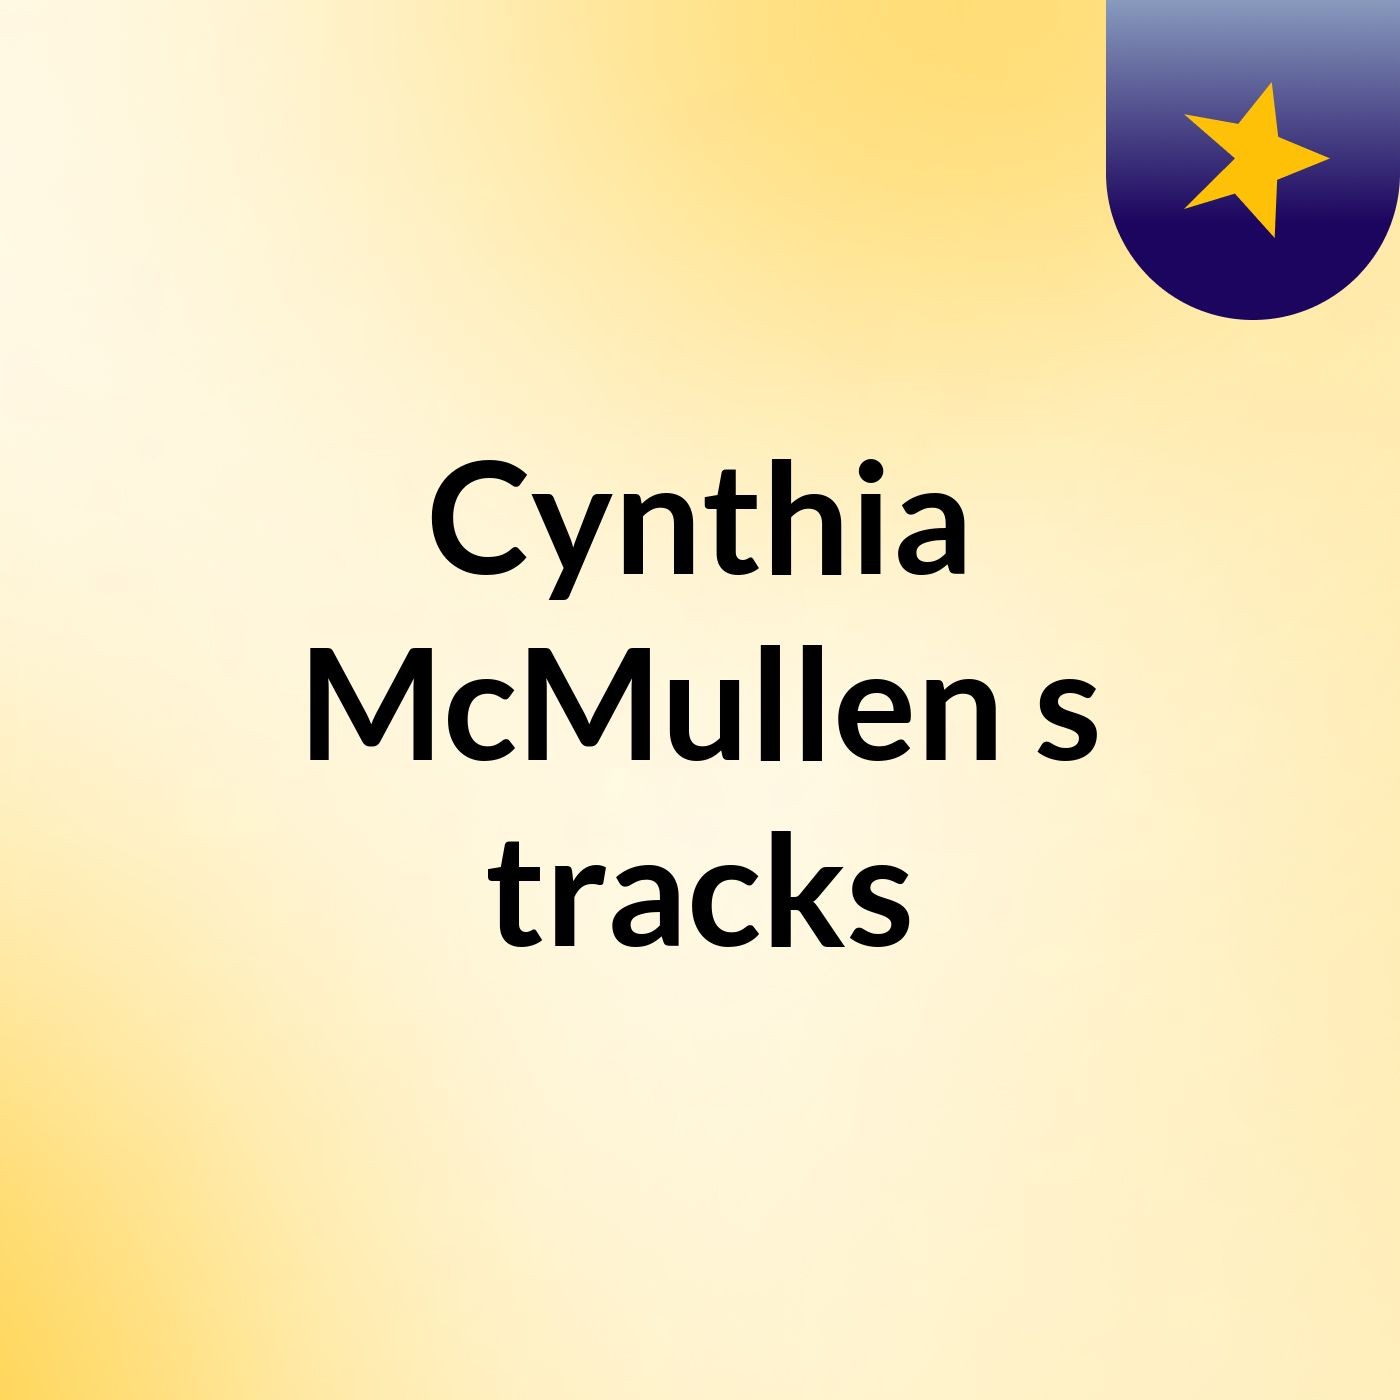 Cynthia McMullen's tracks